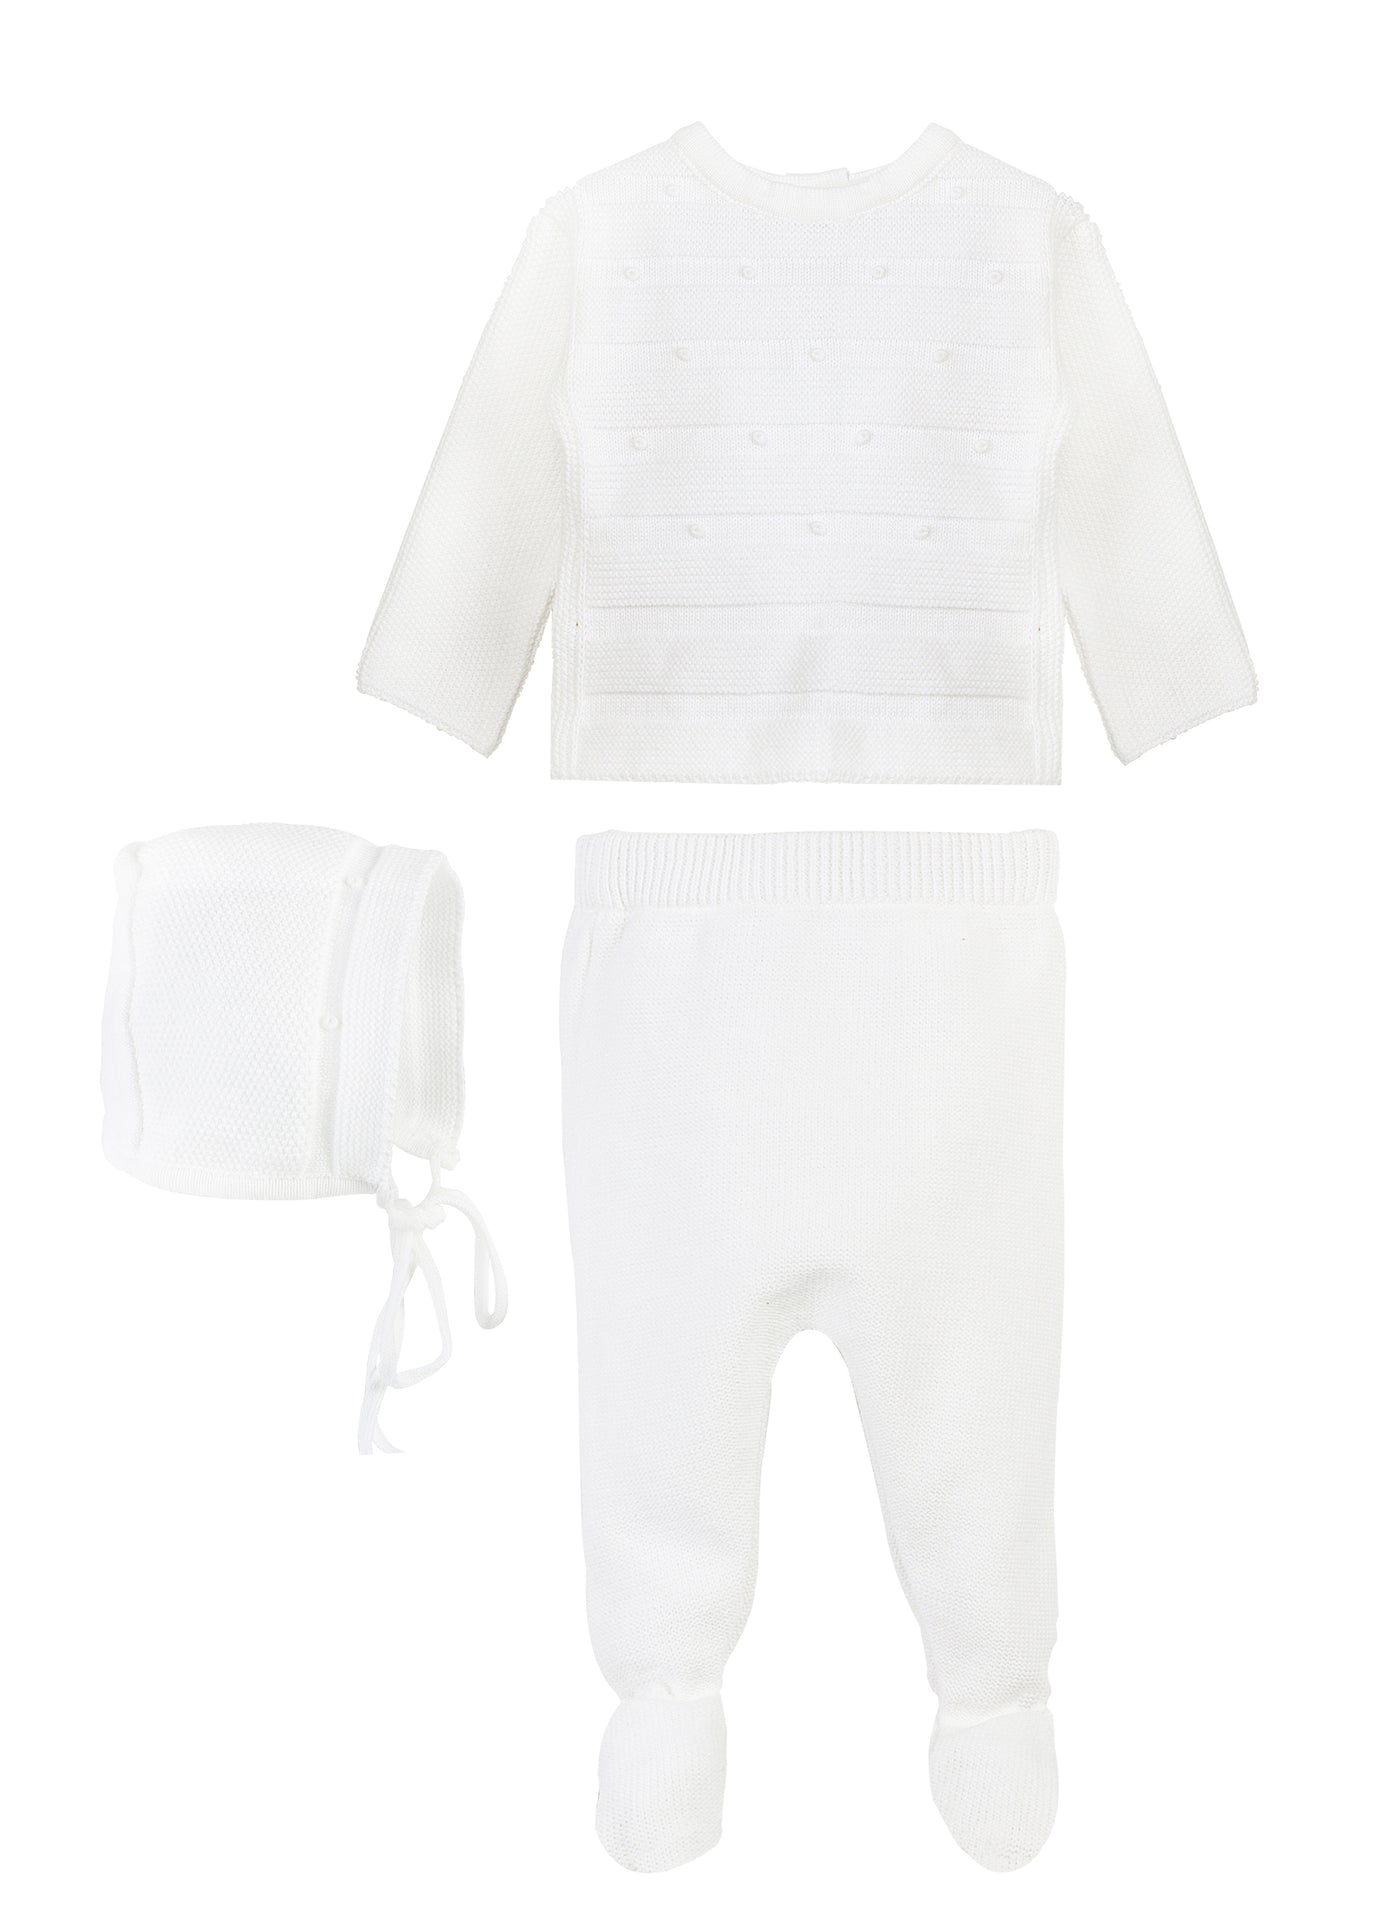 Piccino Piccina Bris Outfit Knit Ribbed White  (Top, Footed Pant, Bonnet)